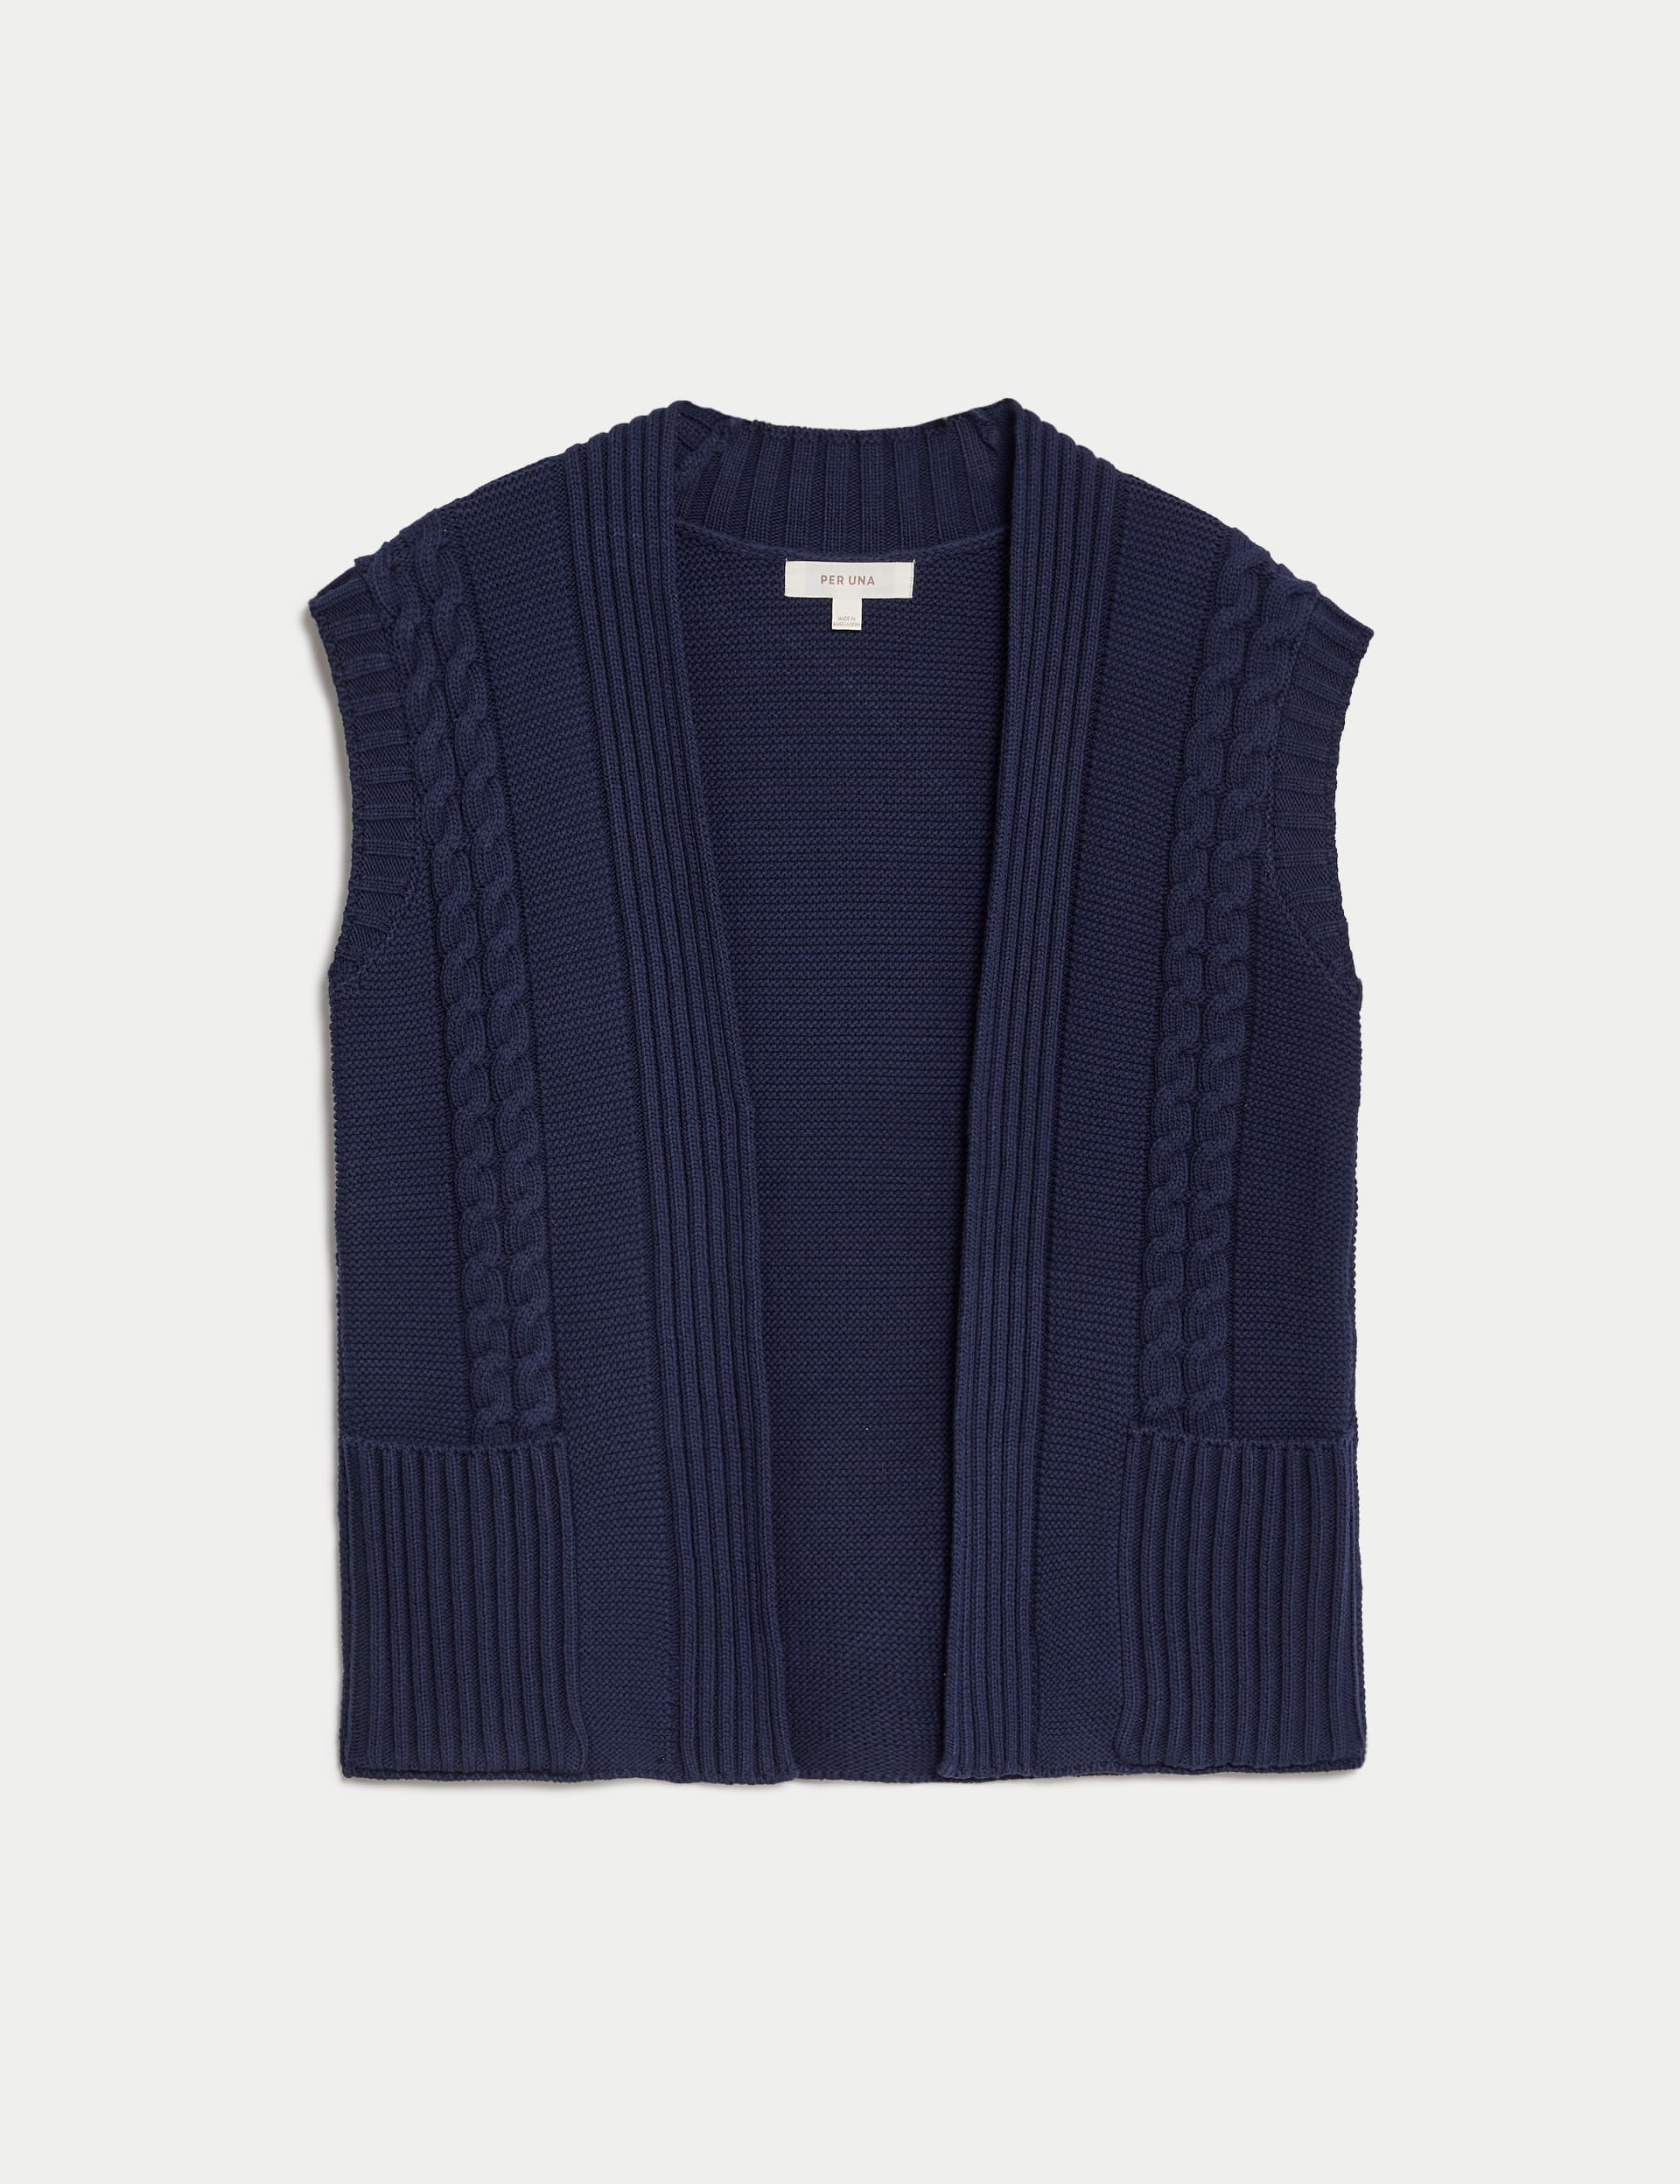 Cotton Rich Knitted Collarless Waistcoat